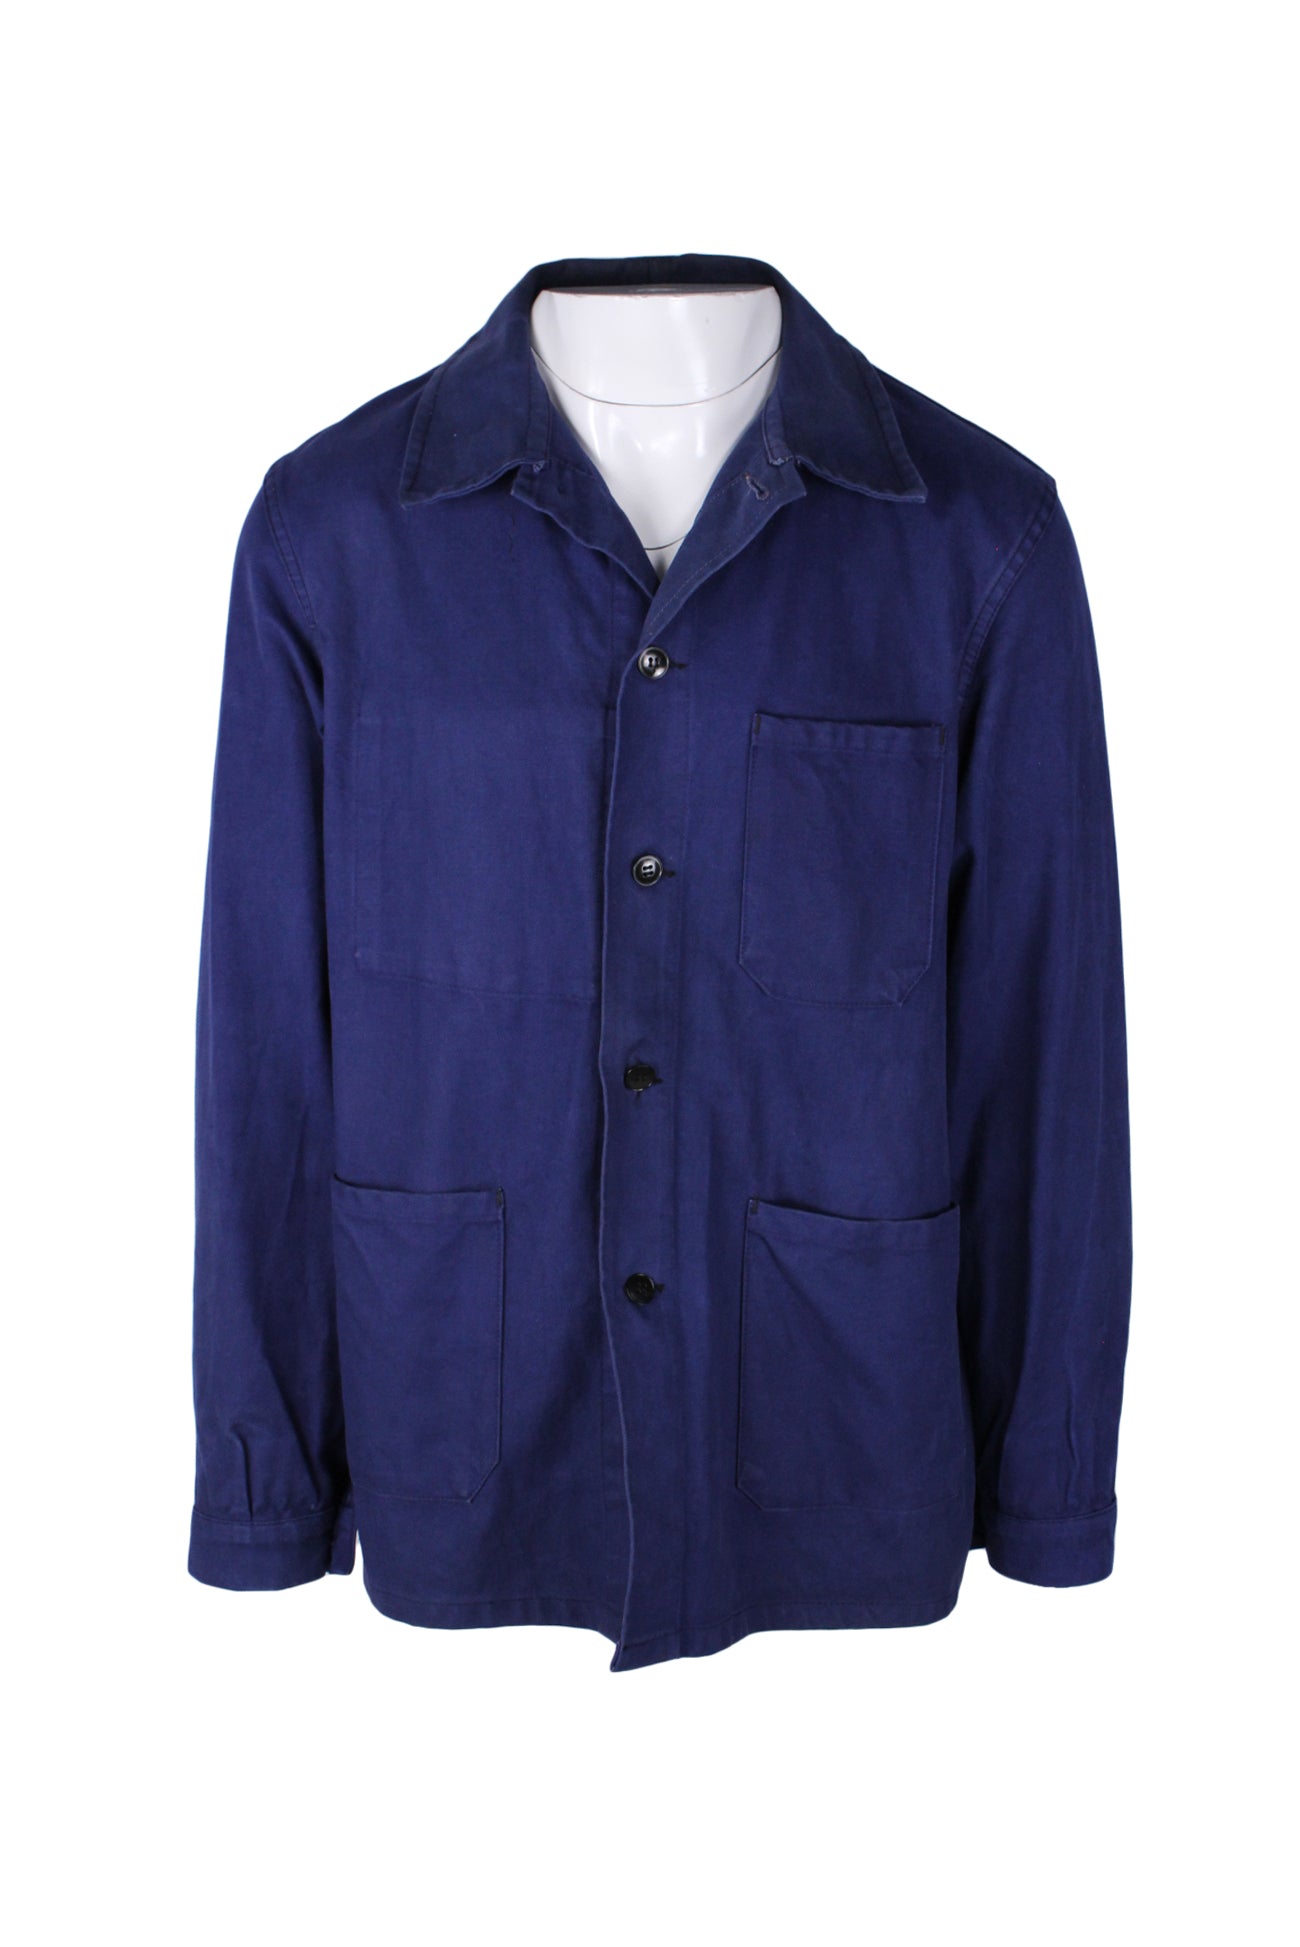 front angle of vintage le meilleur d'amiens deep blue chore jacket. features black button closure up center, three outer patch pockets, one inner pocket, pointed collar, and long sleeves with buttoned cuffs. 